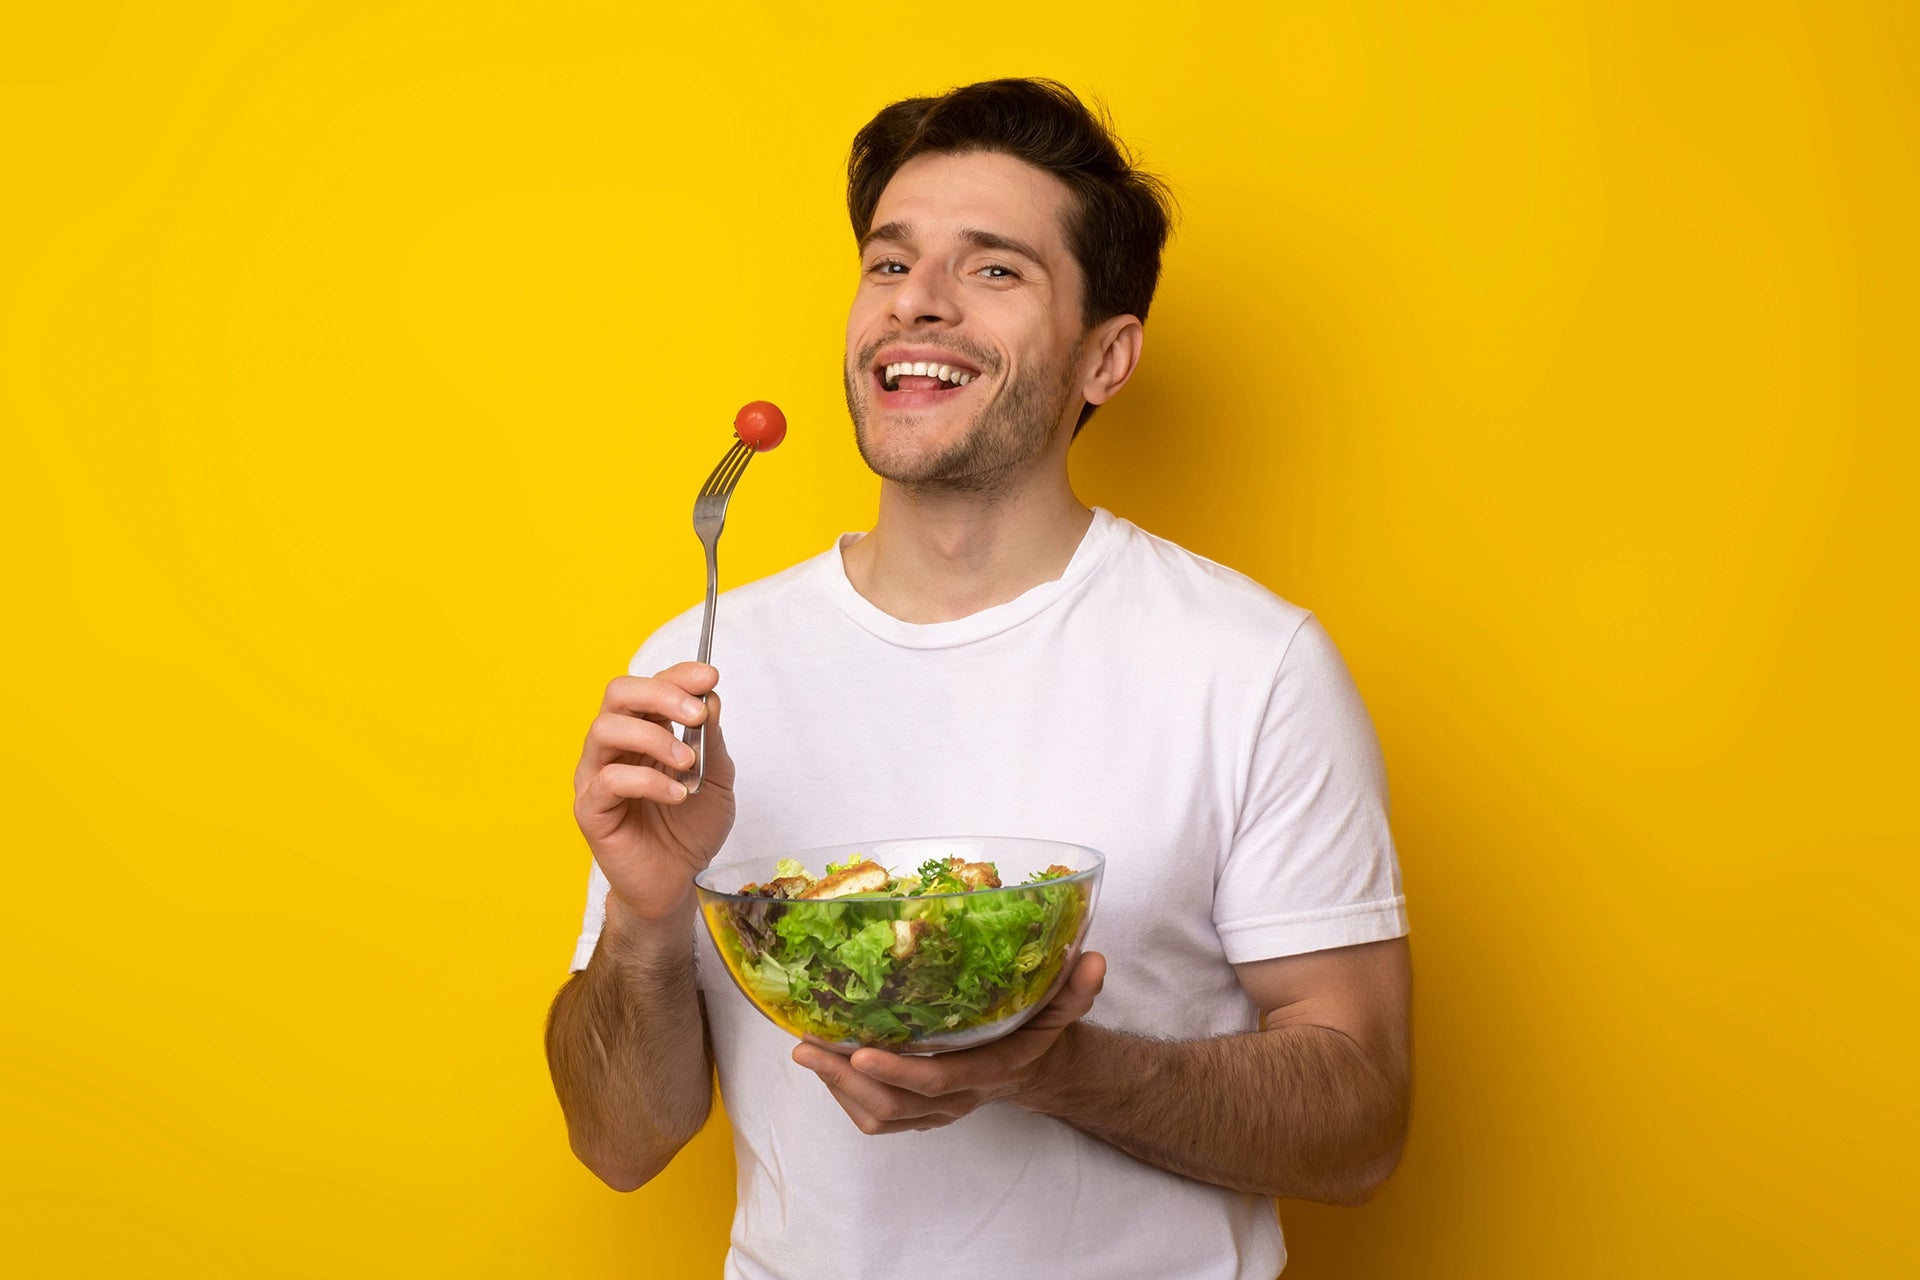 Man holding a salad bowl and smiling